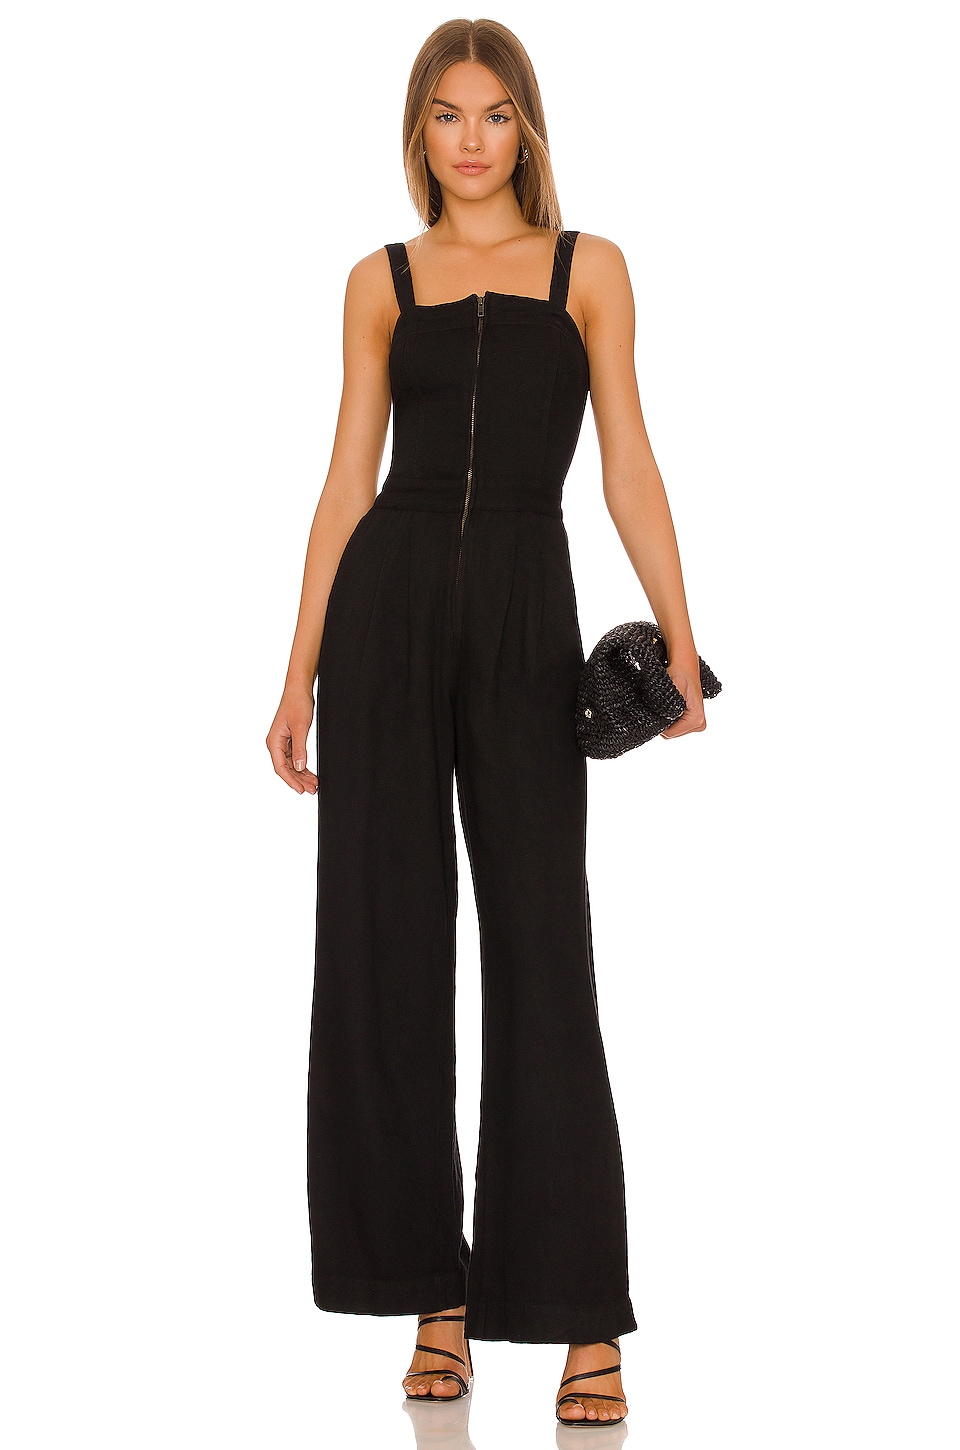 Free People Call On Me Jumpsuit in Black | REVOLVE